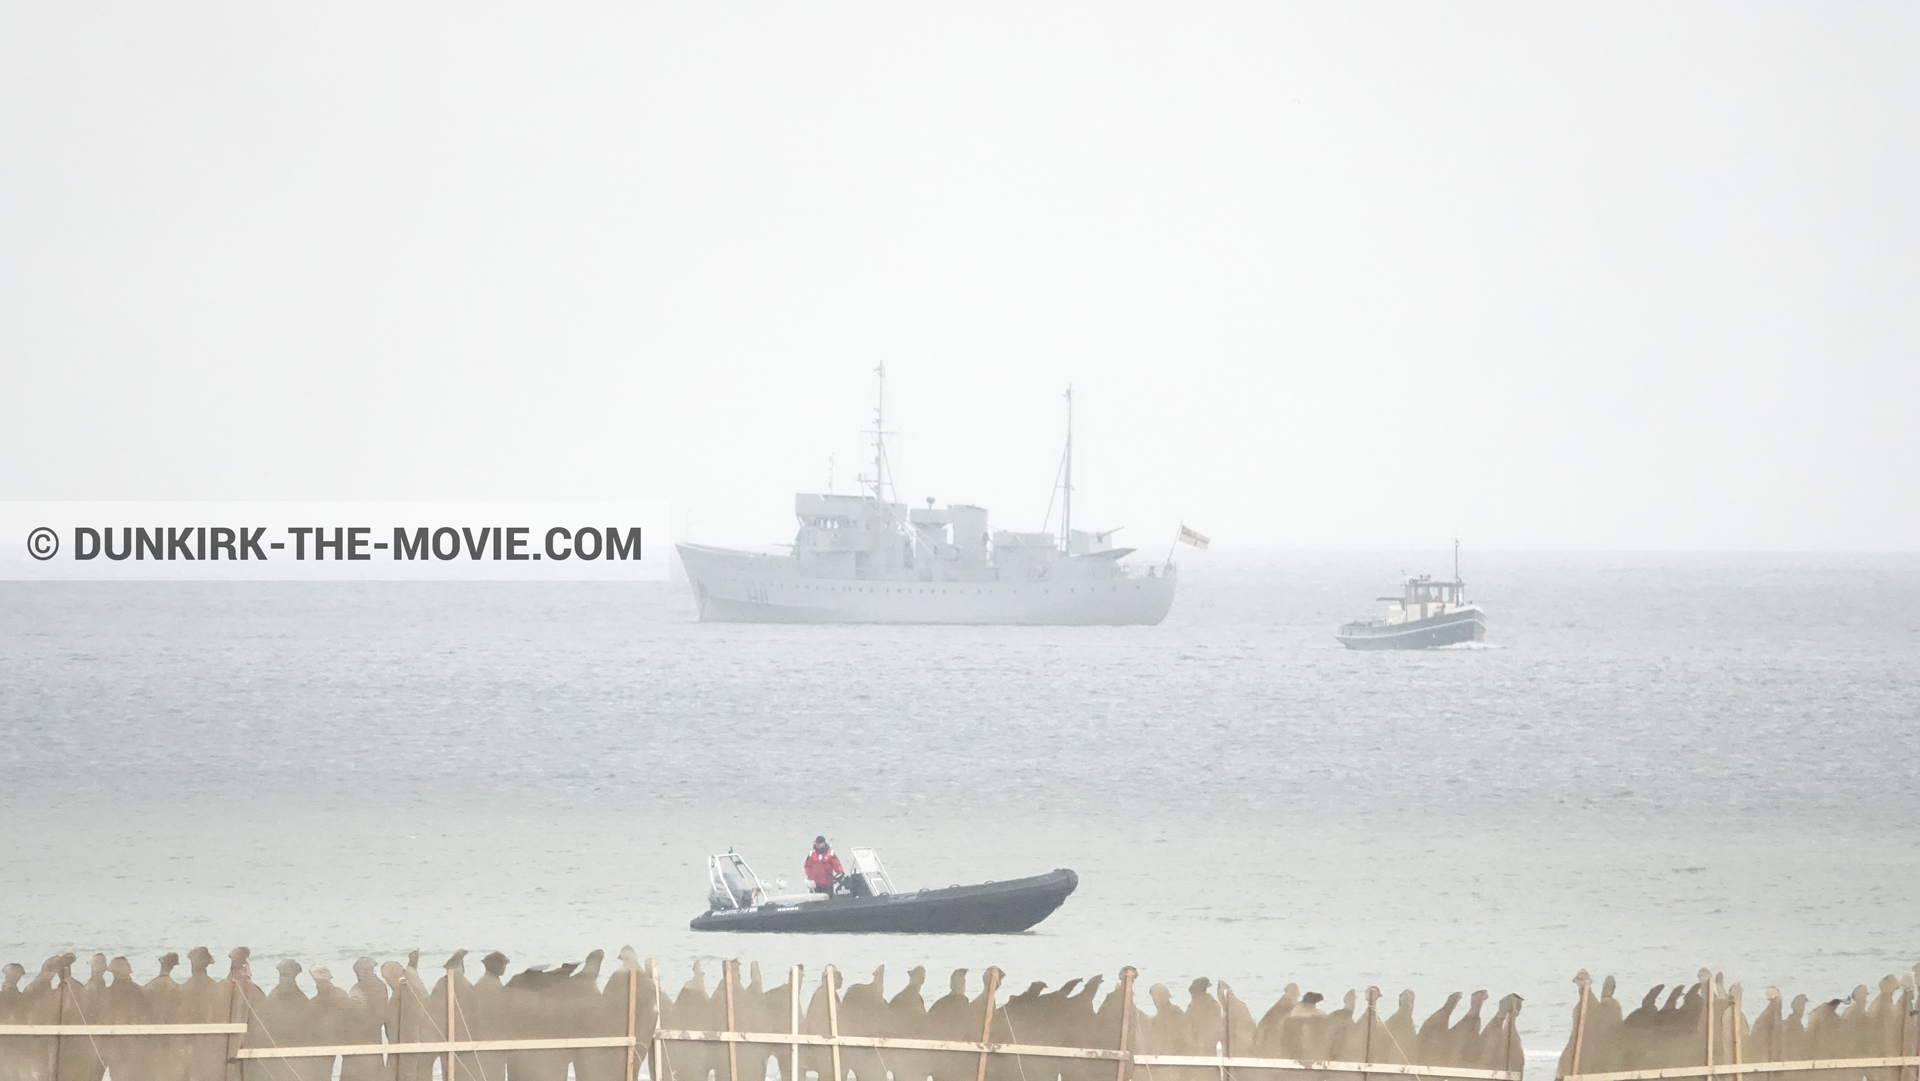 Picture with inflatable dinghy, decor, decor, calm sea, H11 - MLV Castor, technical team, grey sky, boat,  from behind the scene of the Dunkirk movie by Nolan